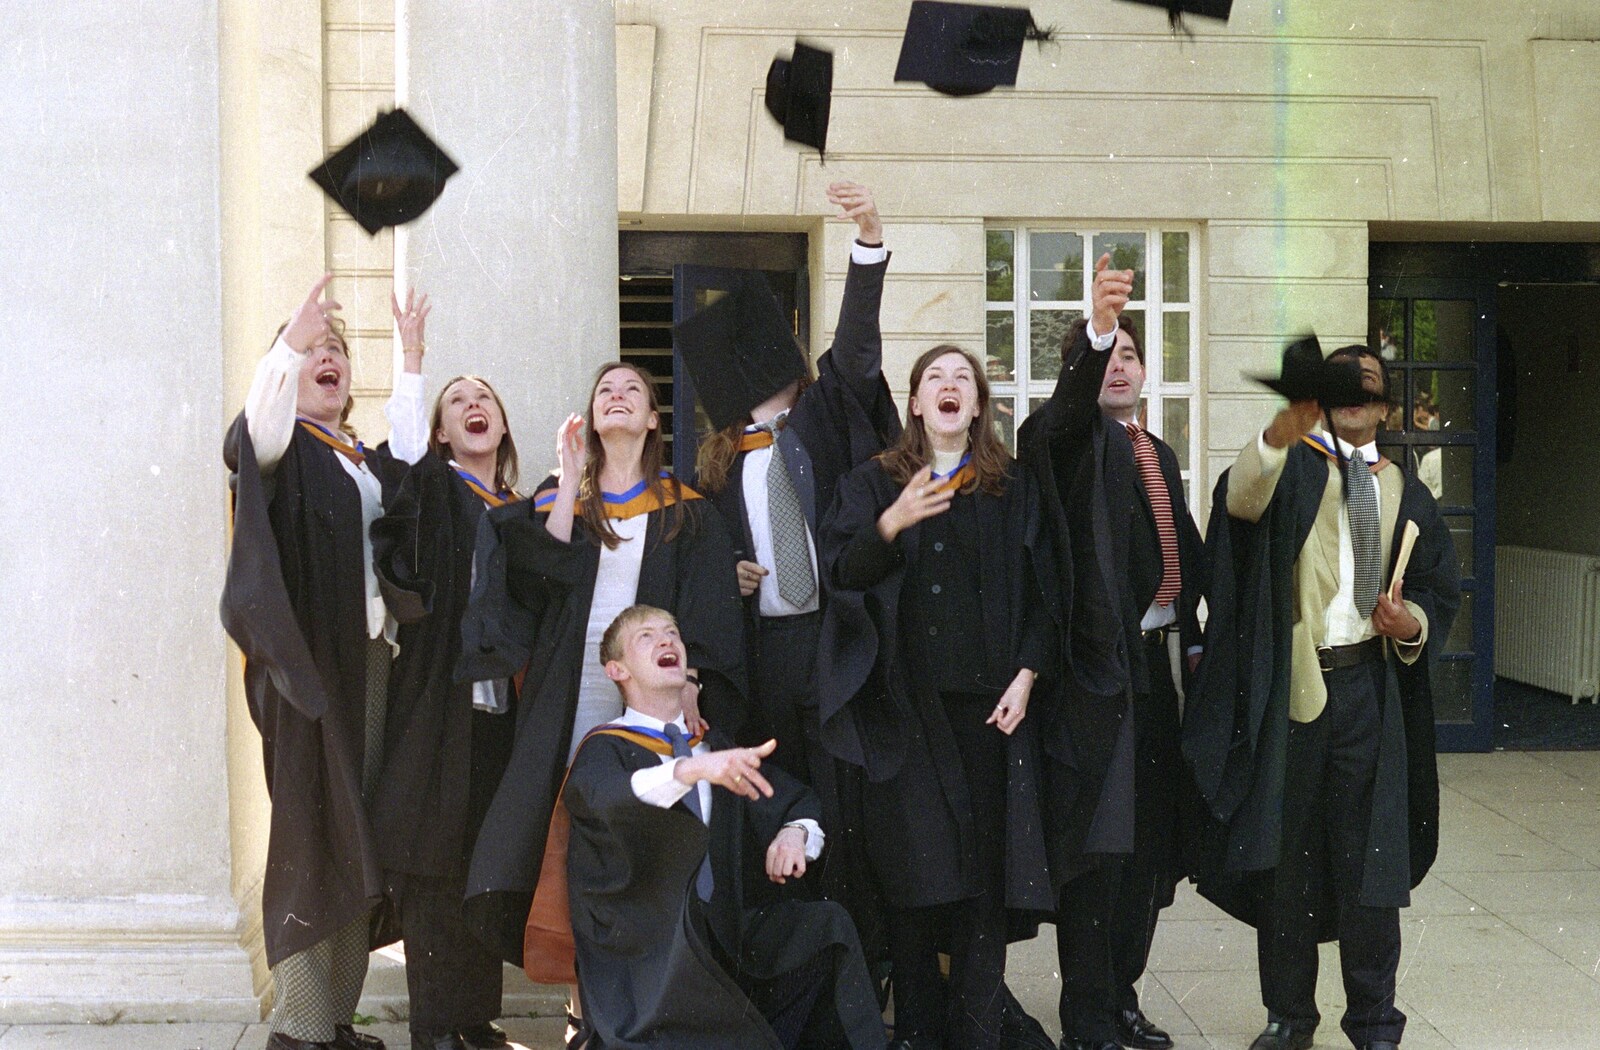 Sis Graduates from De Montfort, Leicester, Leicestershire - 9th August 1997: The traditional 'throw the mortar-boards in the air' shot